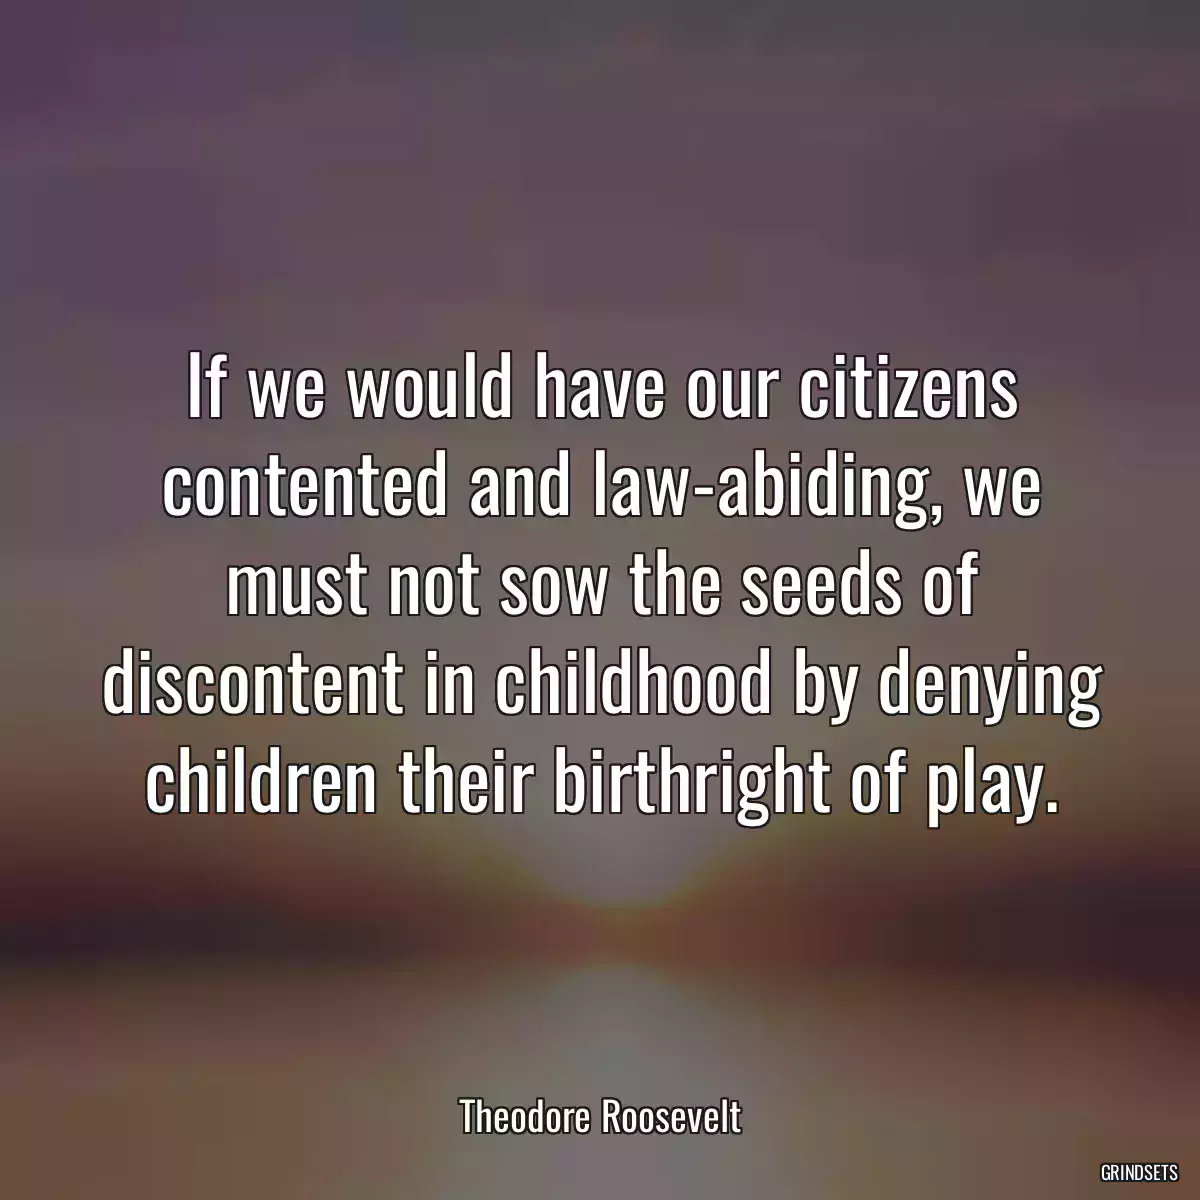 If we would have our citizens contented and law-abiding, we must not sow the seeds of discontent in childhood by denying children their birthright of play.